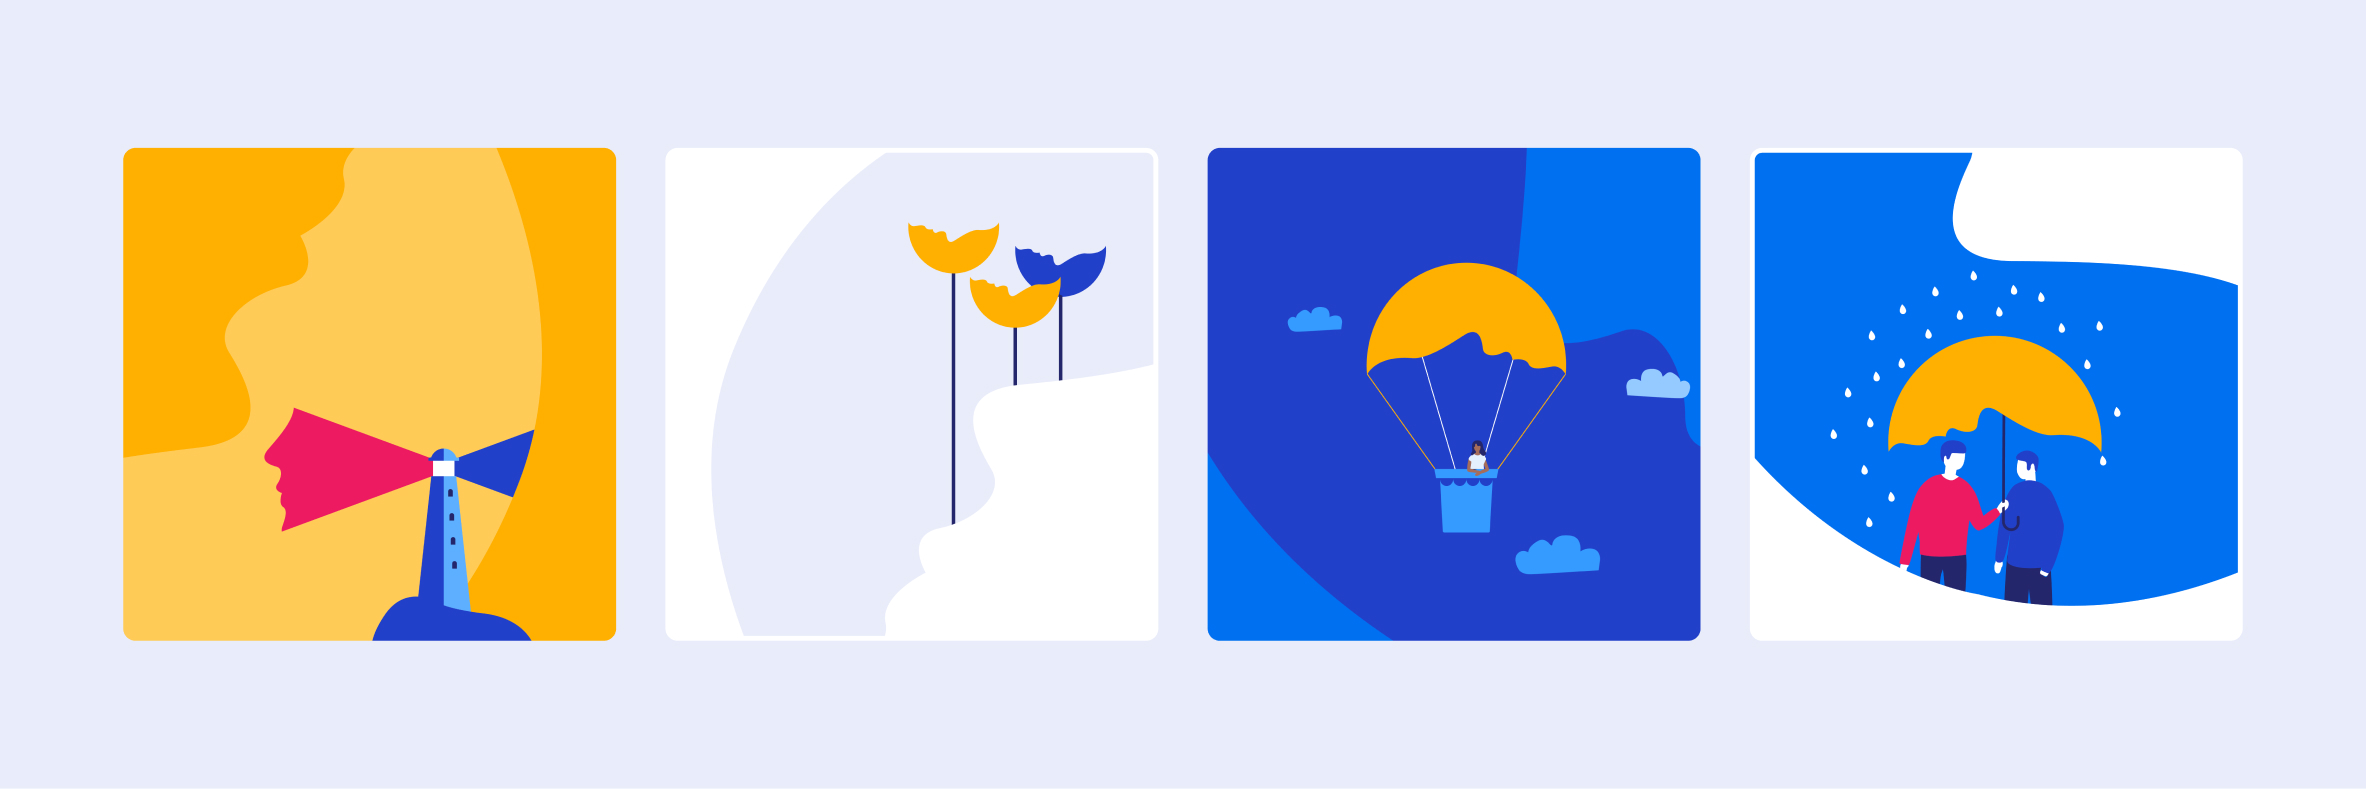 Four illustrations used in the Beyond Blue Mental Wellbeing Guide.